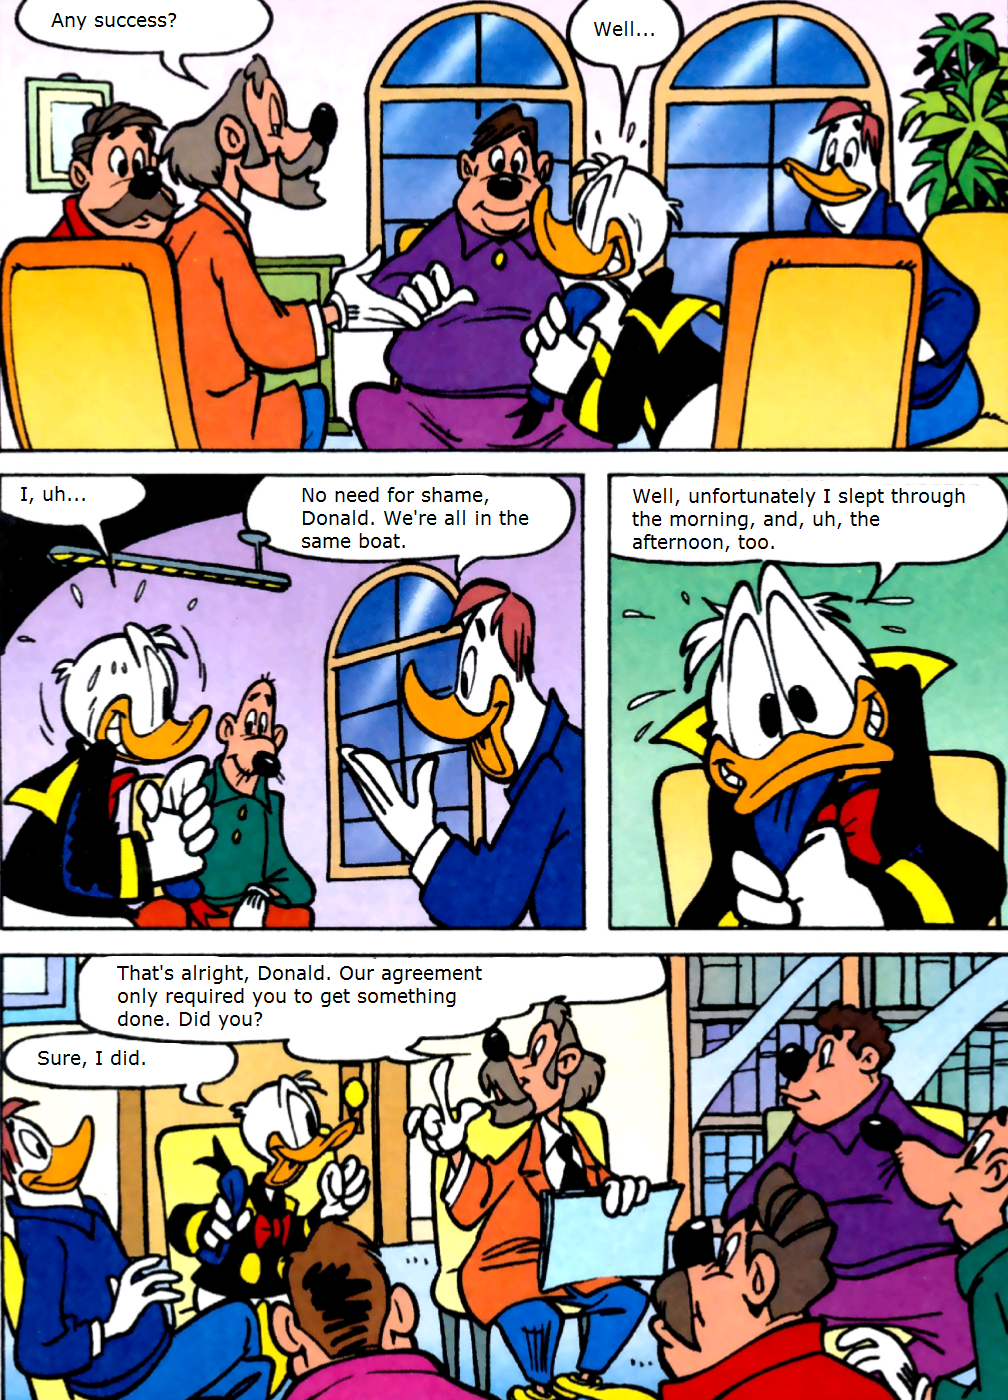 land-of-birds-and-comics:Donald Duck Goes To Group Therapy For His Debilitating Executive